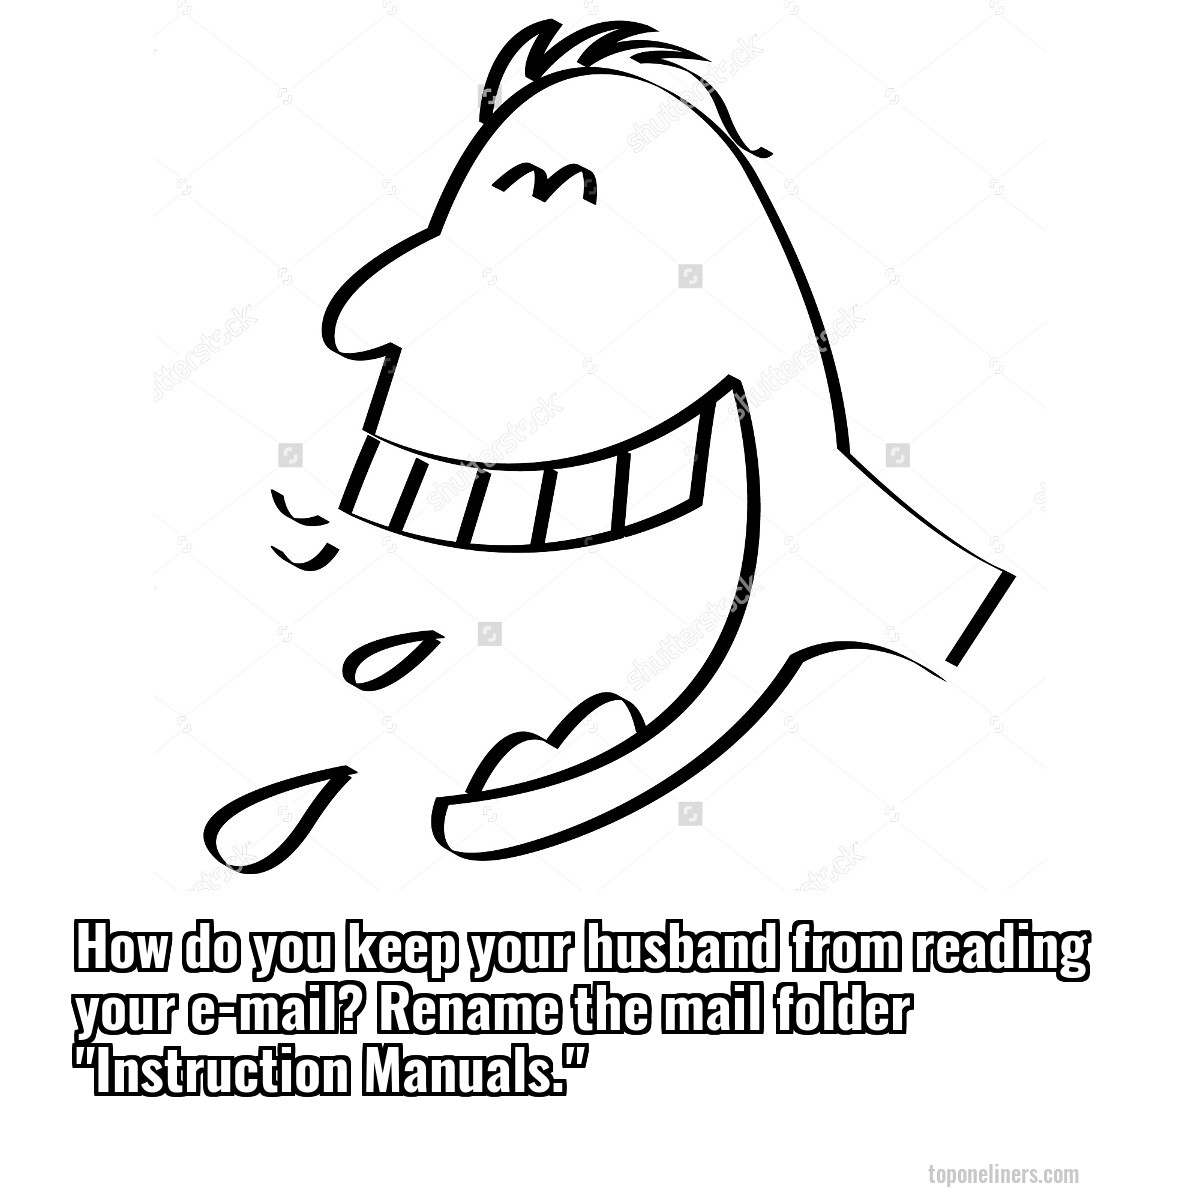 How do you keep your husband from reading your e-mail? Rename the mail folder "Instruction Manuals."
